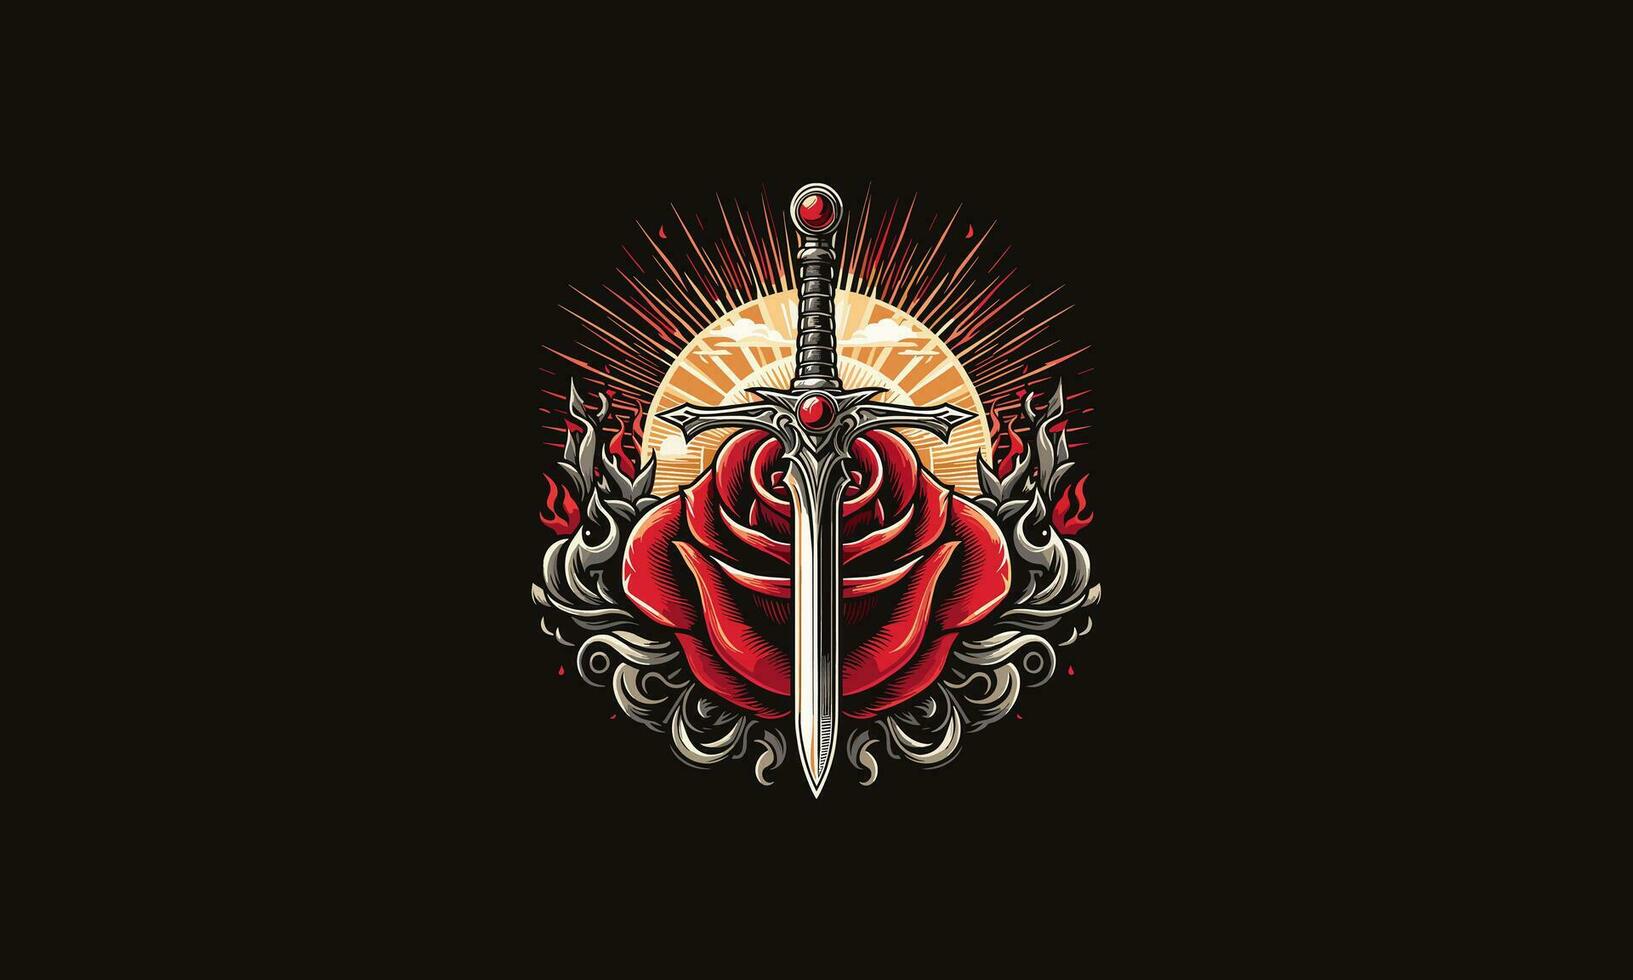 sword and red rose and flames vector design